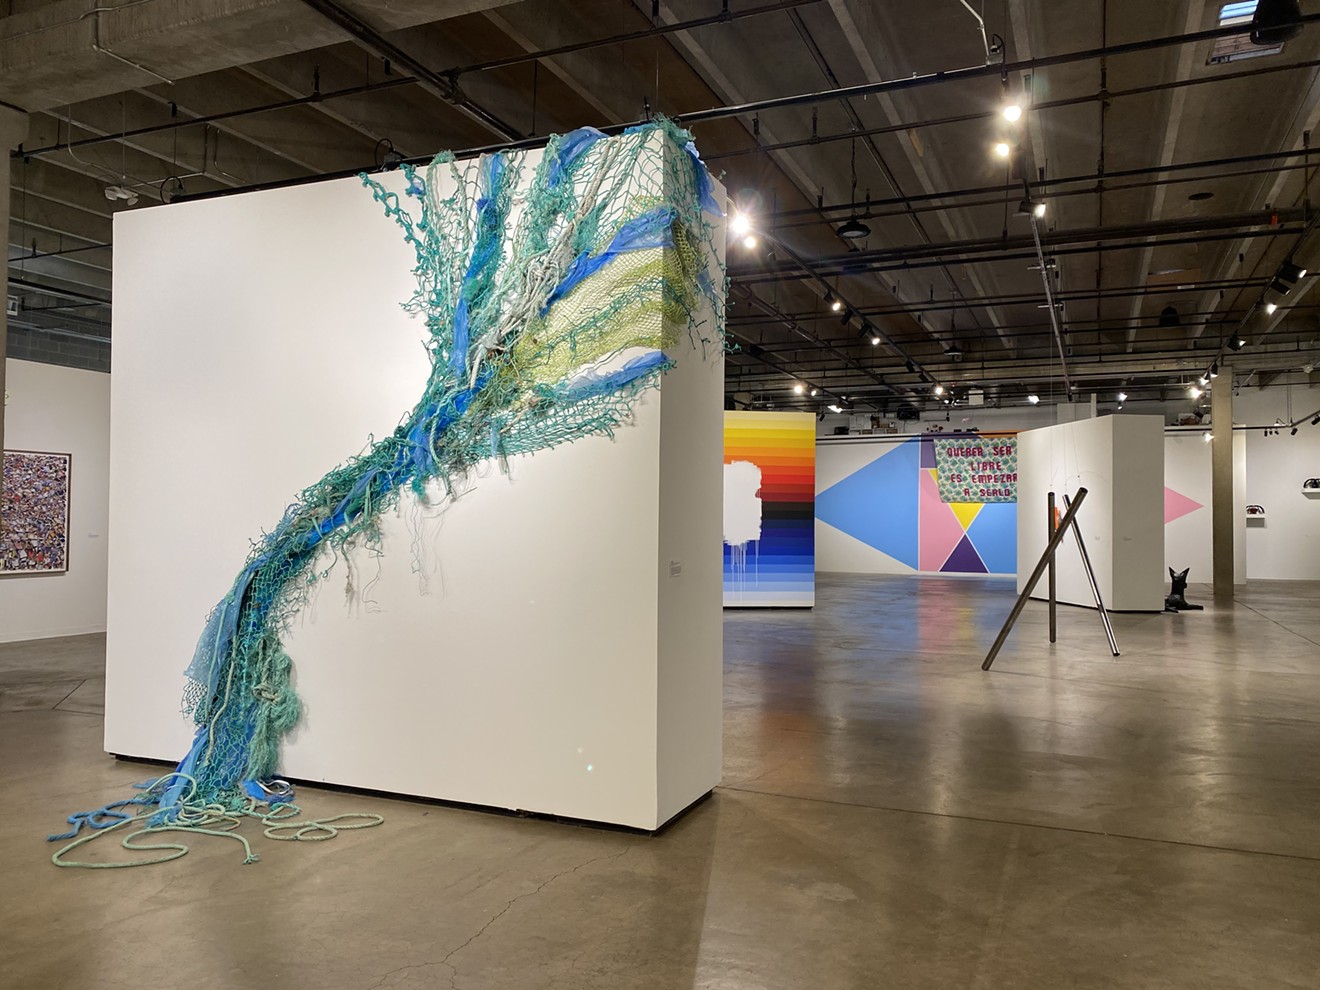 Installation view of Near in the Distance, with one side of Regan Rosburg’s “Everything Is Fine” in the left foreground.